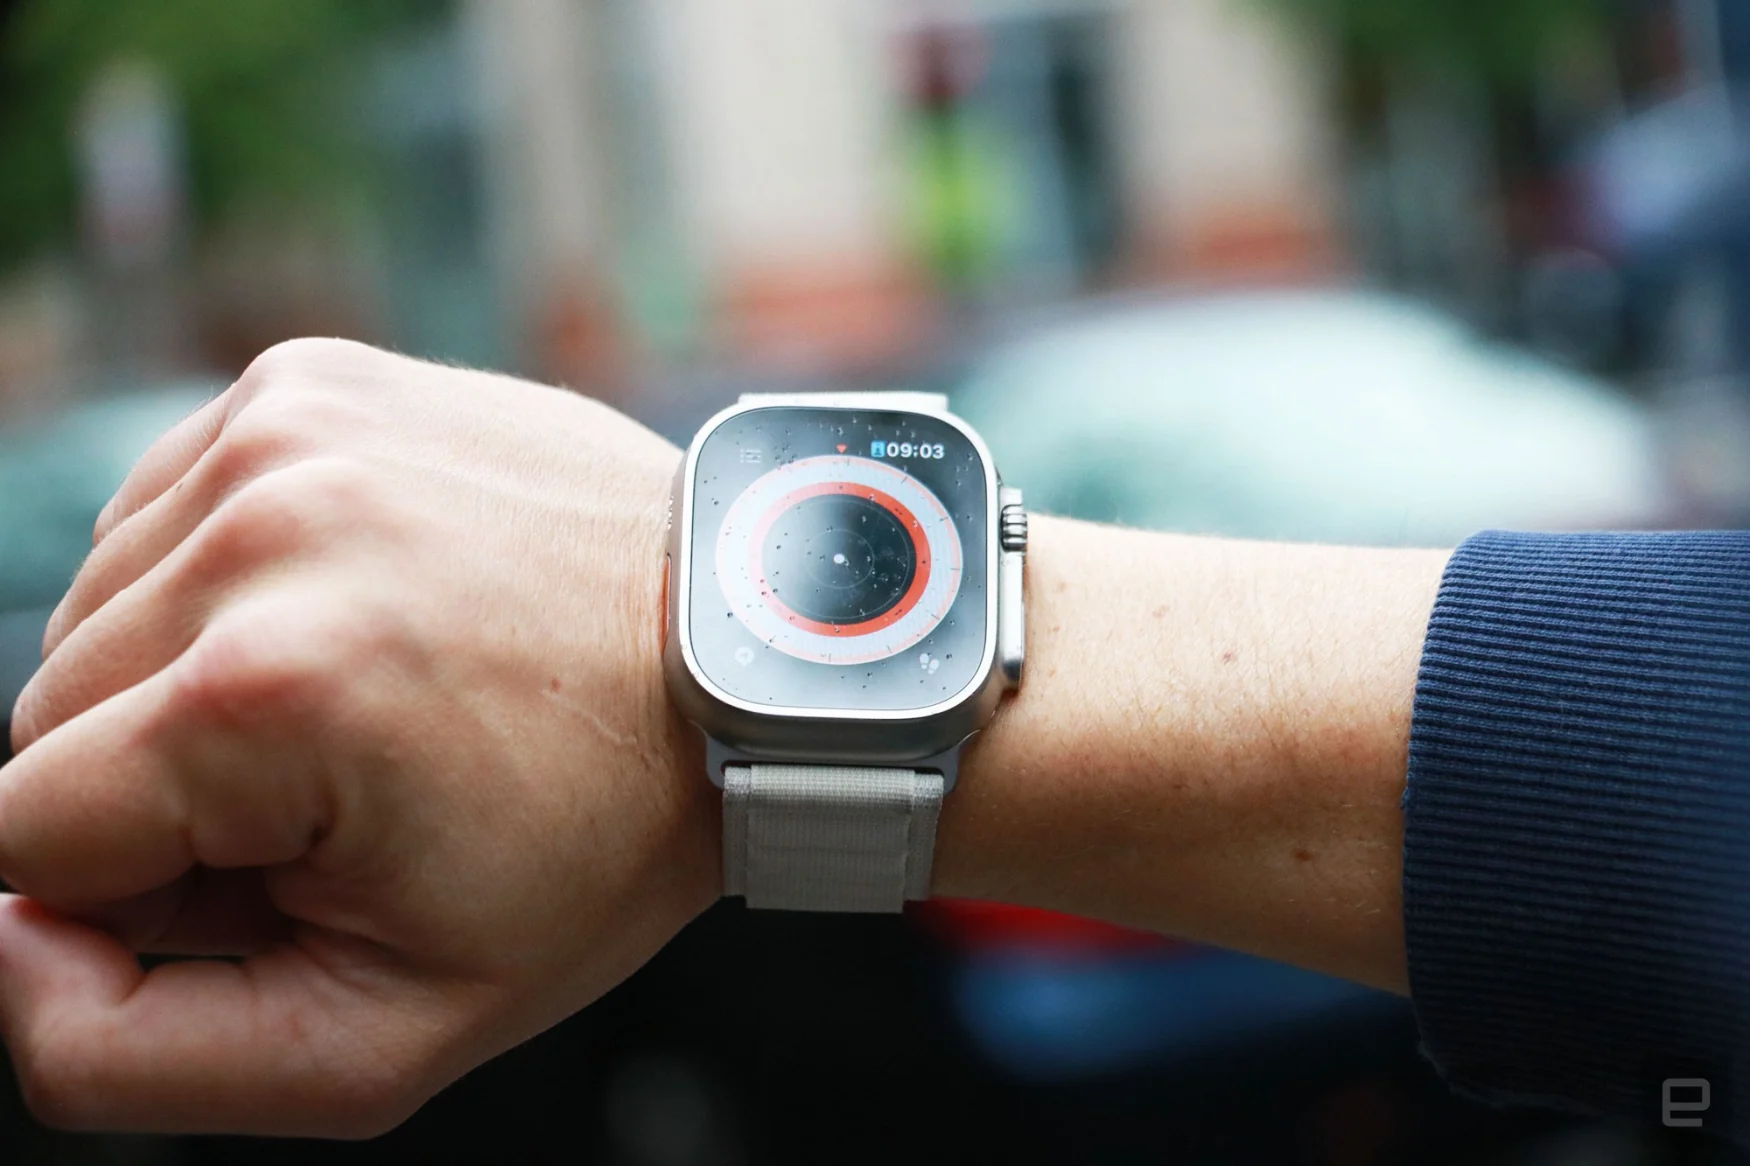 The Apple Watch Ultra with alpine loop strap on a person's wrist. The screen shows the Compass app's so-called technical view, with a white dot in the middle. 